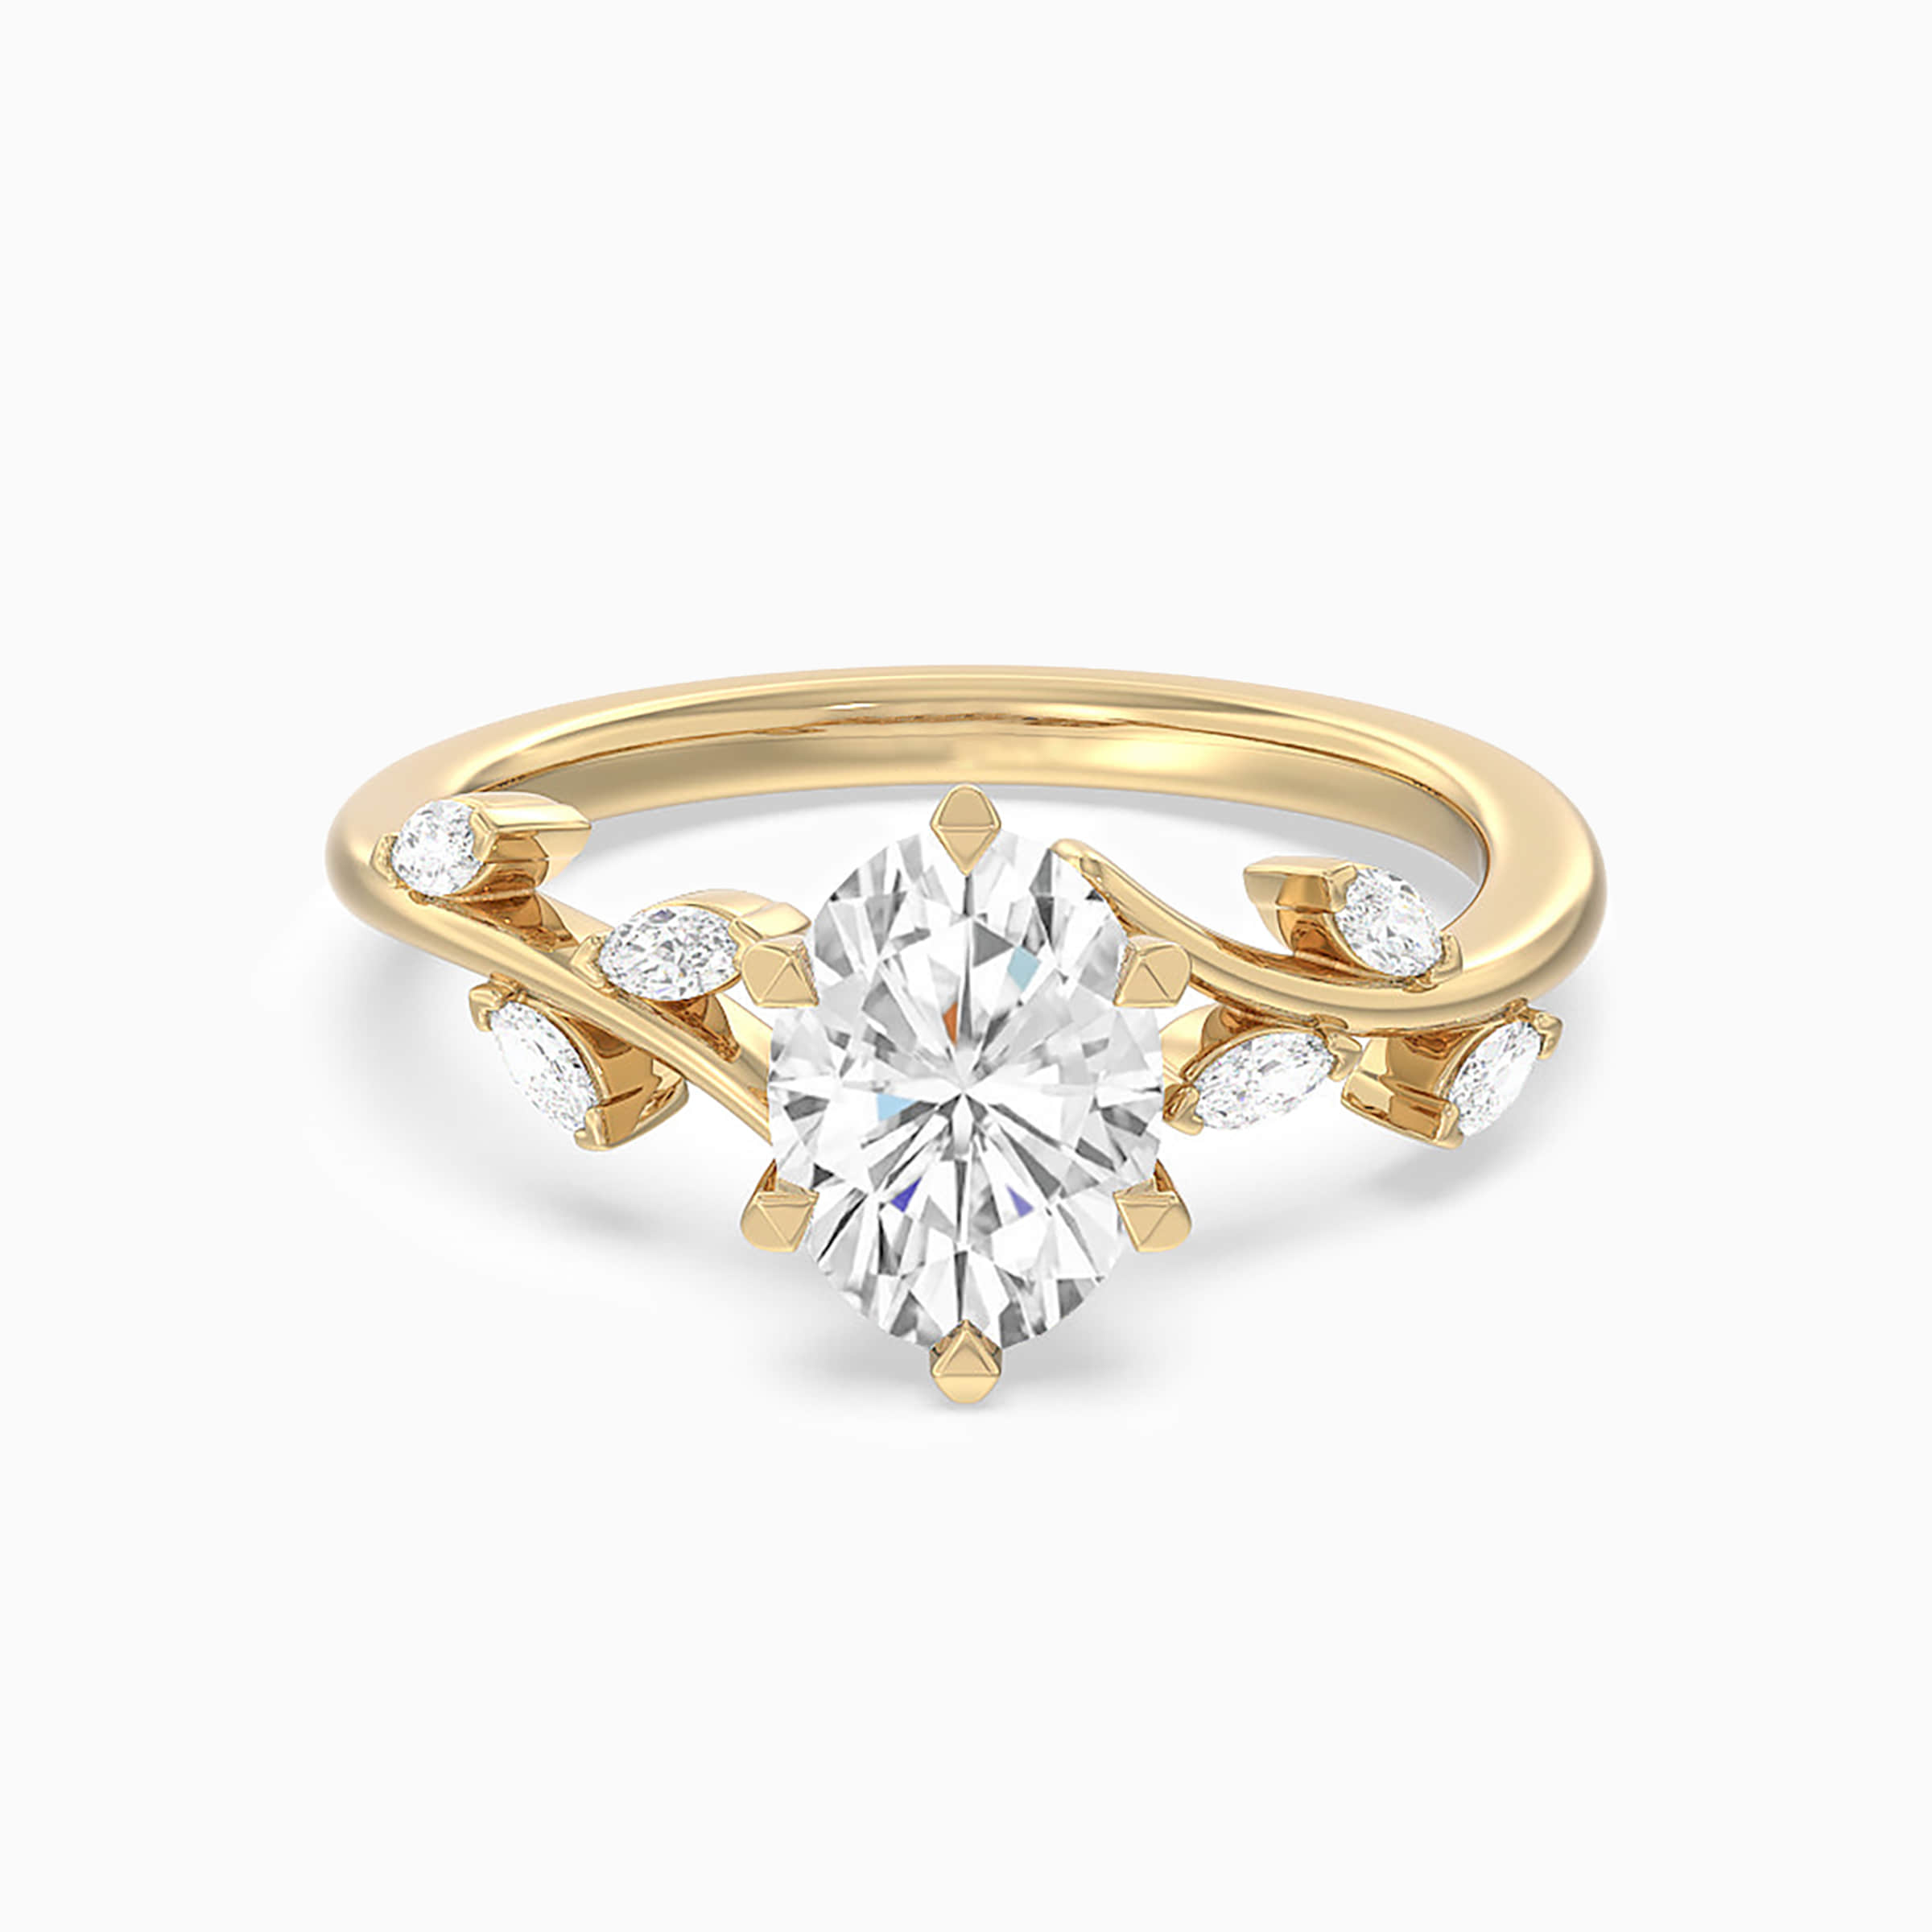 Darry Ring oval diamond bypass engagement ring in yellow gold